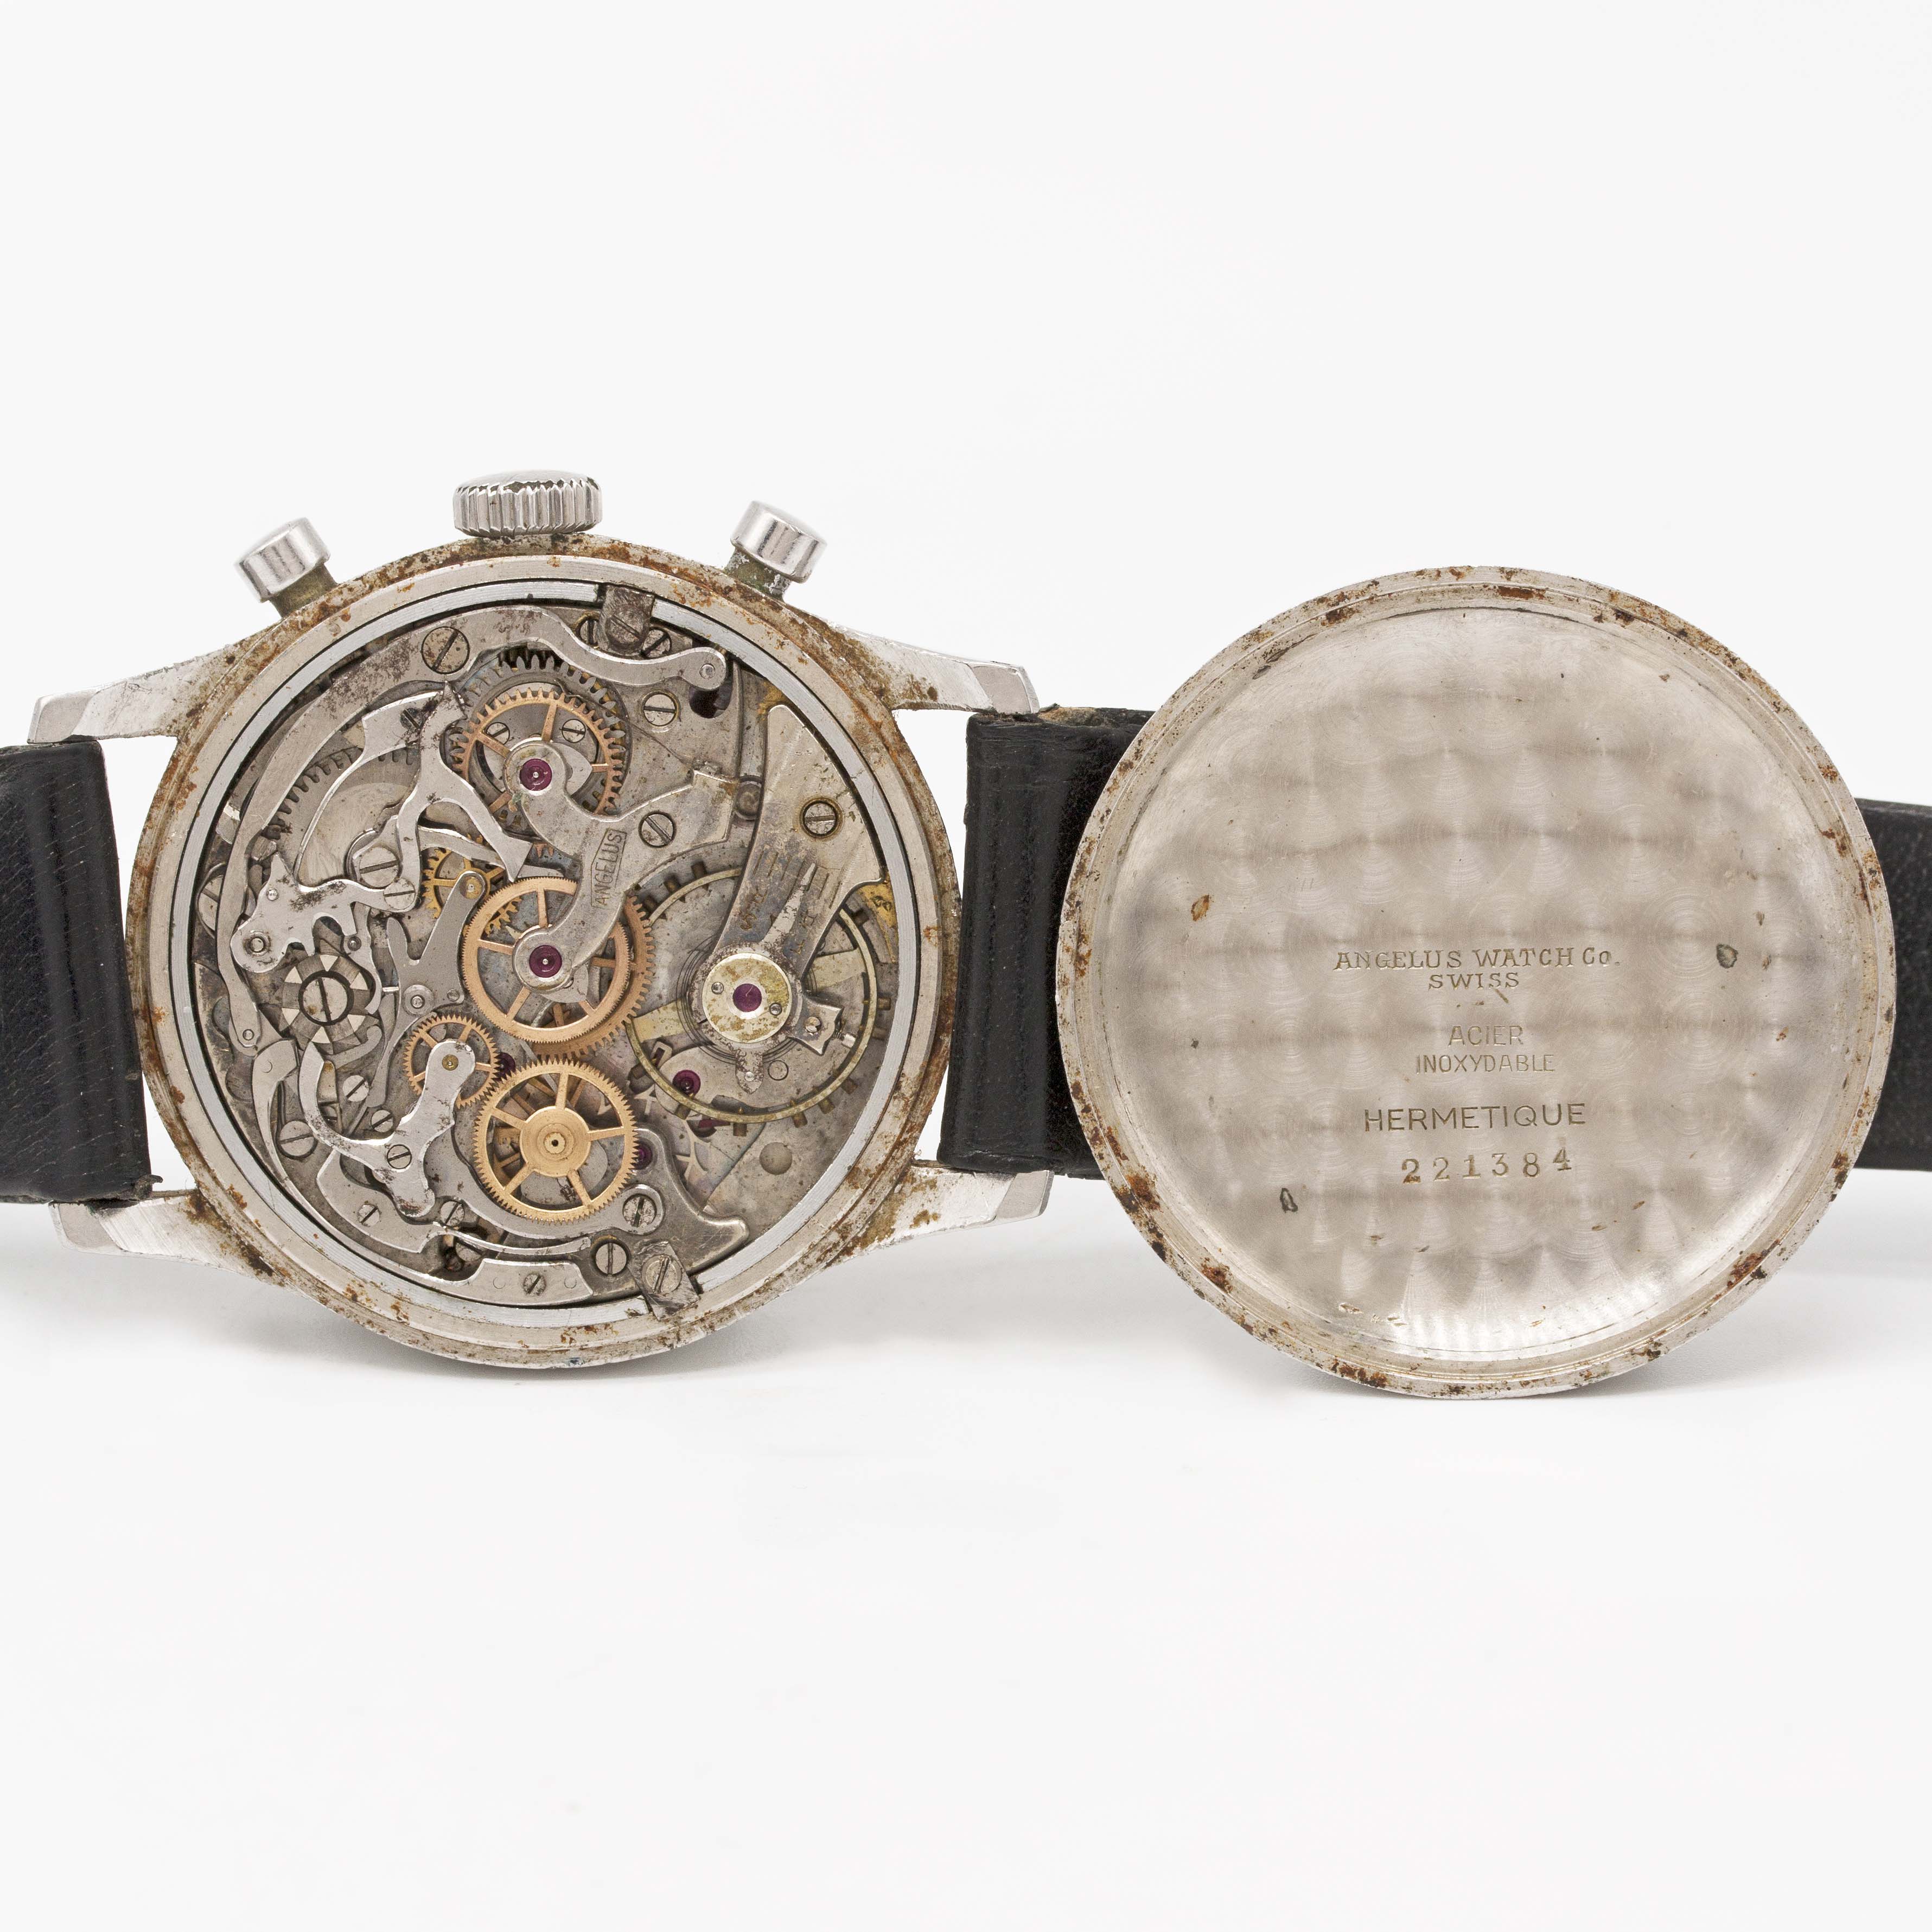 A GENTLEMAN'S LARGE SIZE STAINLESS STEEL ANGELUS HERMETIQUE CHRONOGRAPH WRIST WATCH CIRCA 1940s - Image 4 of 4